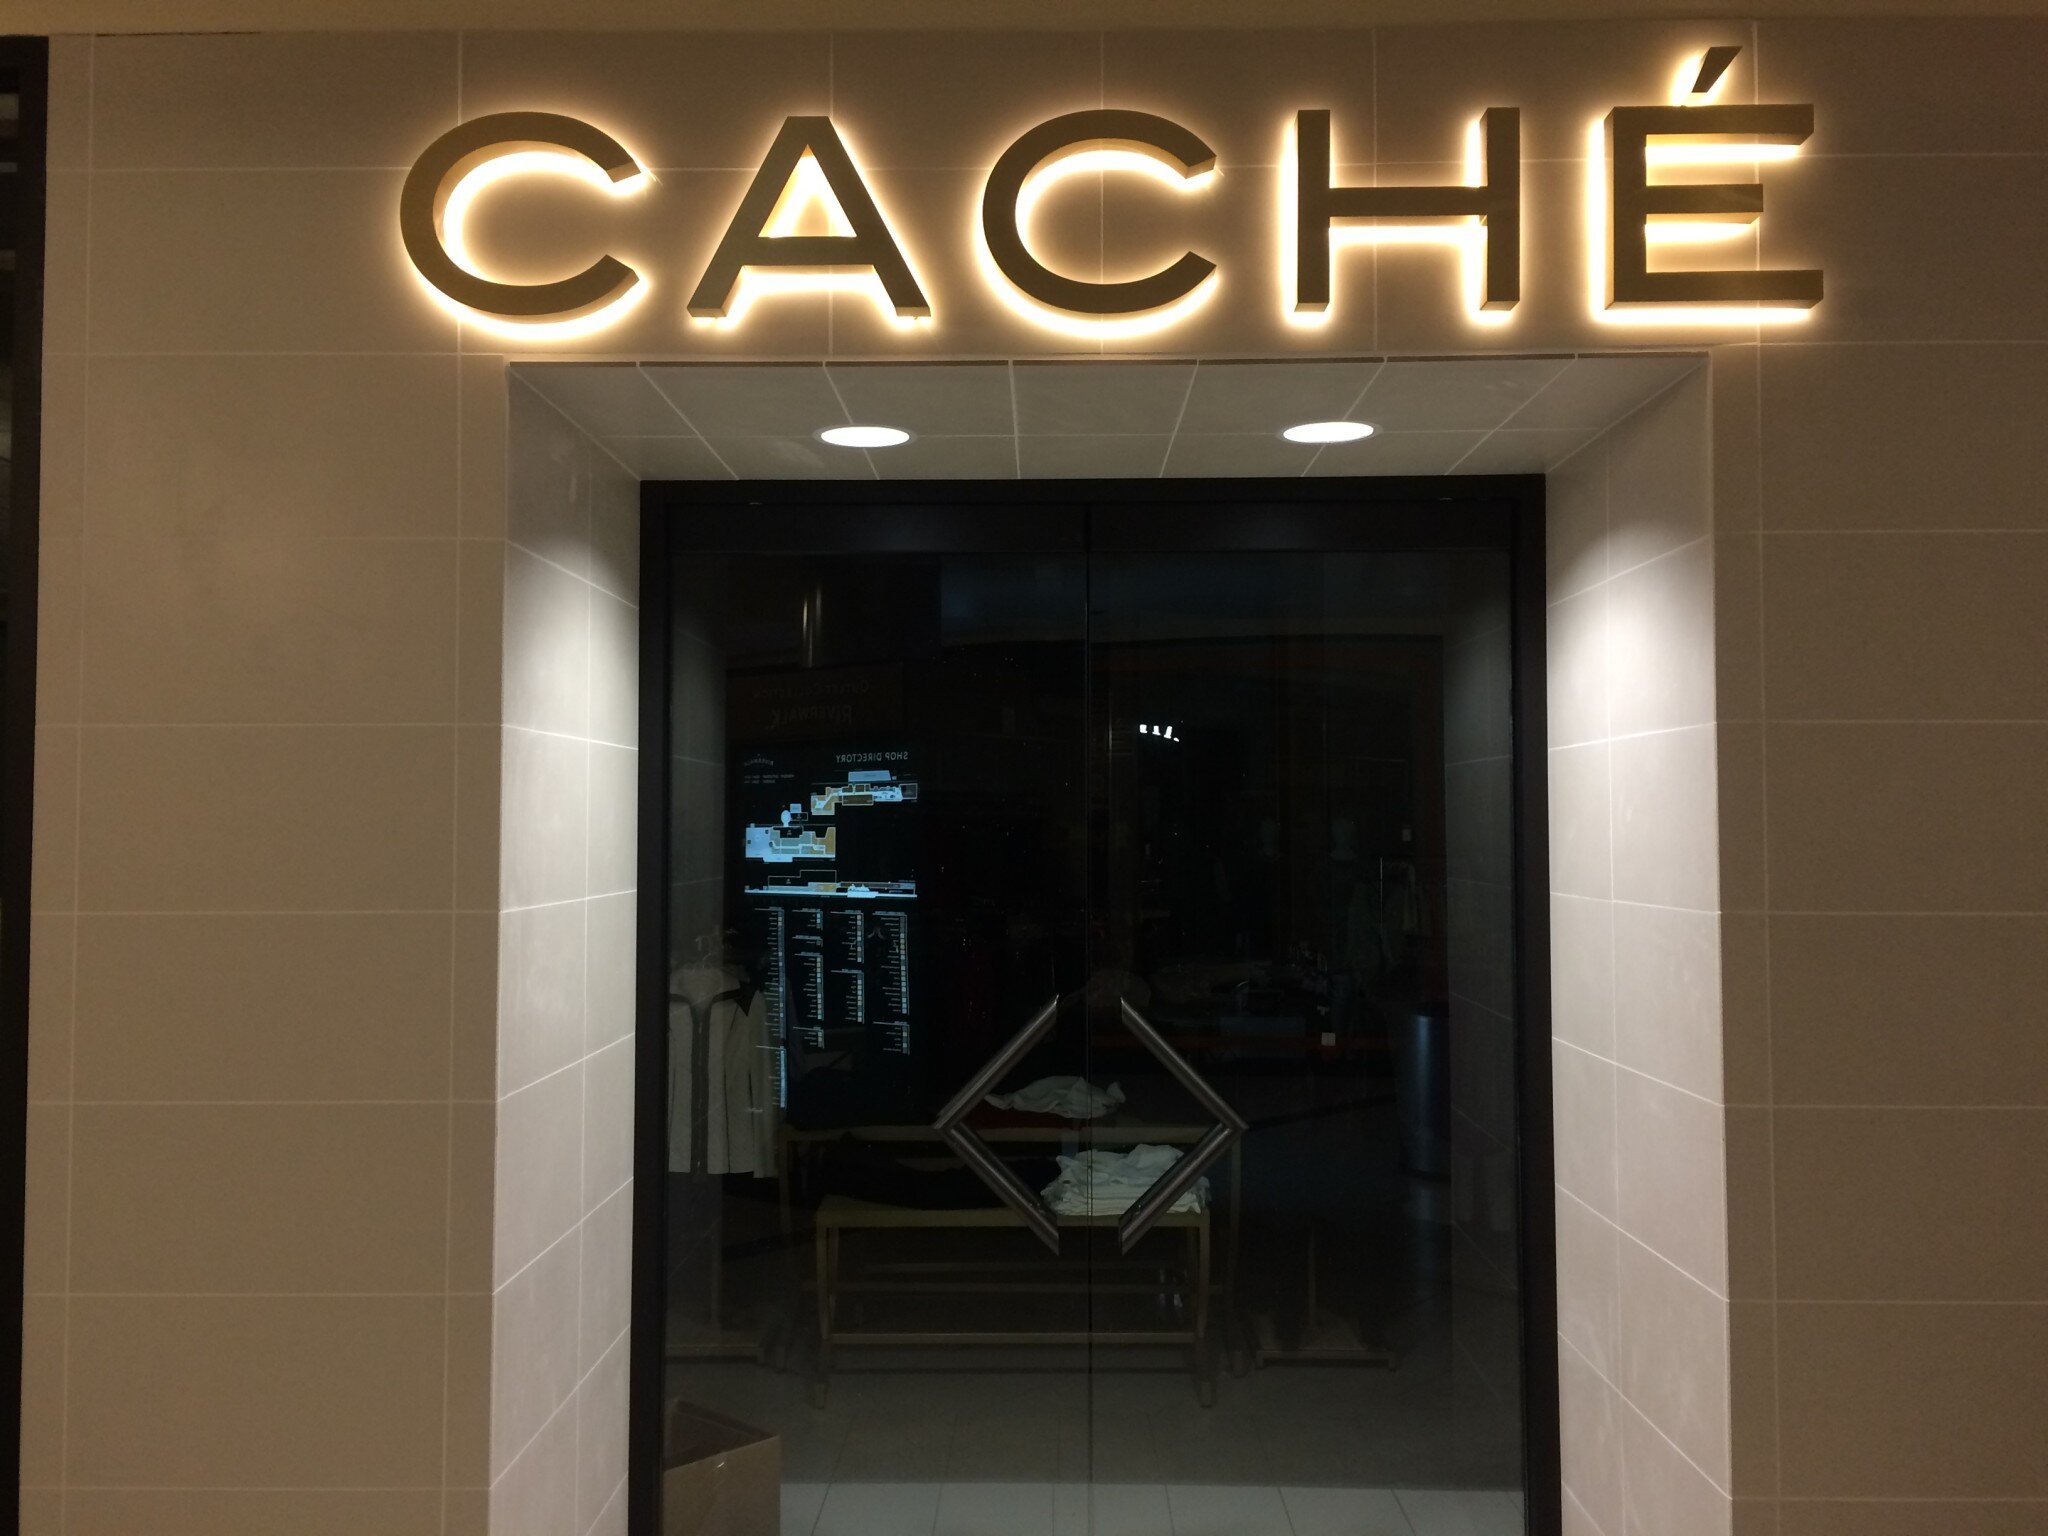 Cache Channel Letters